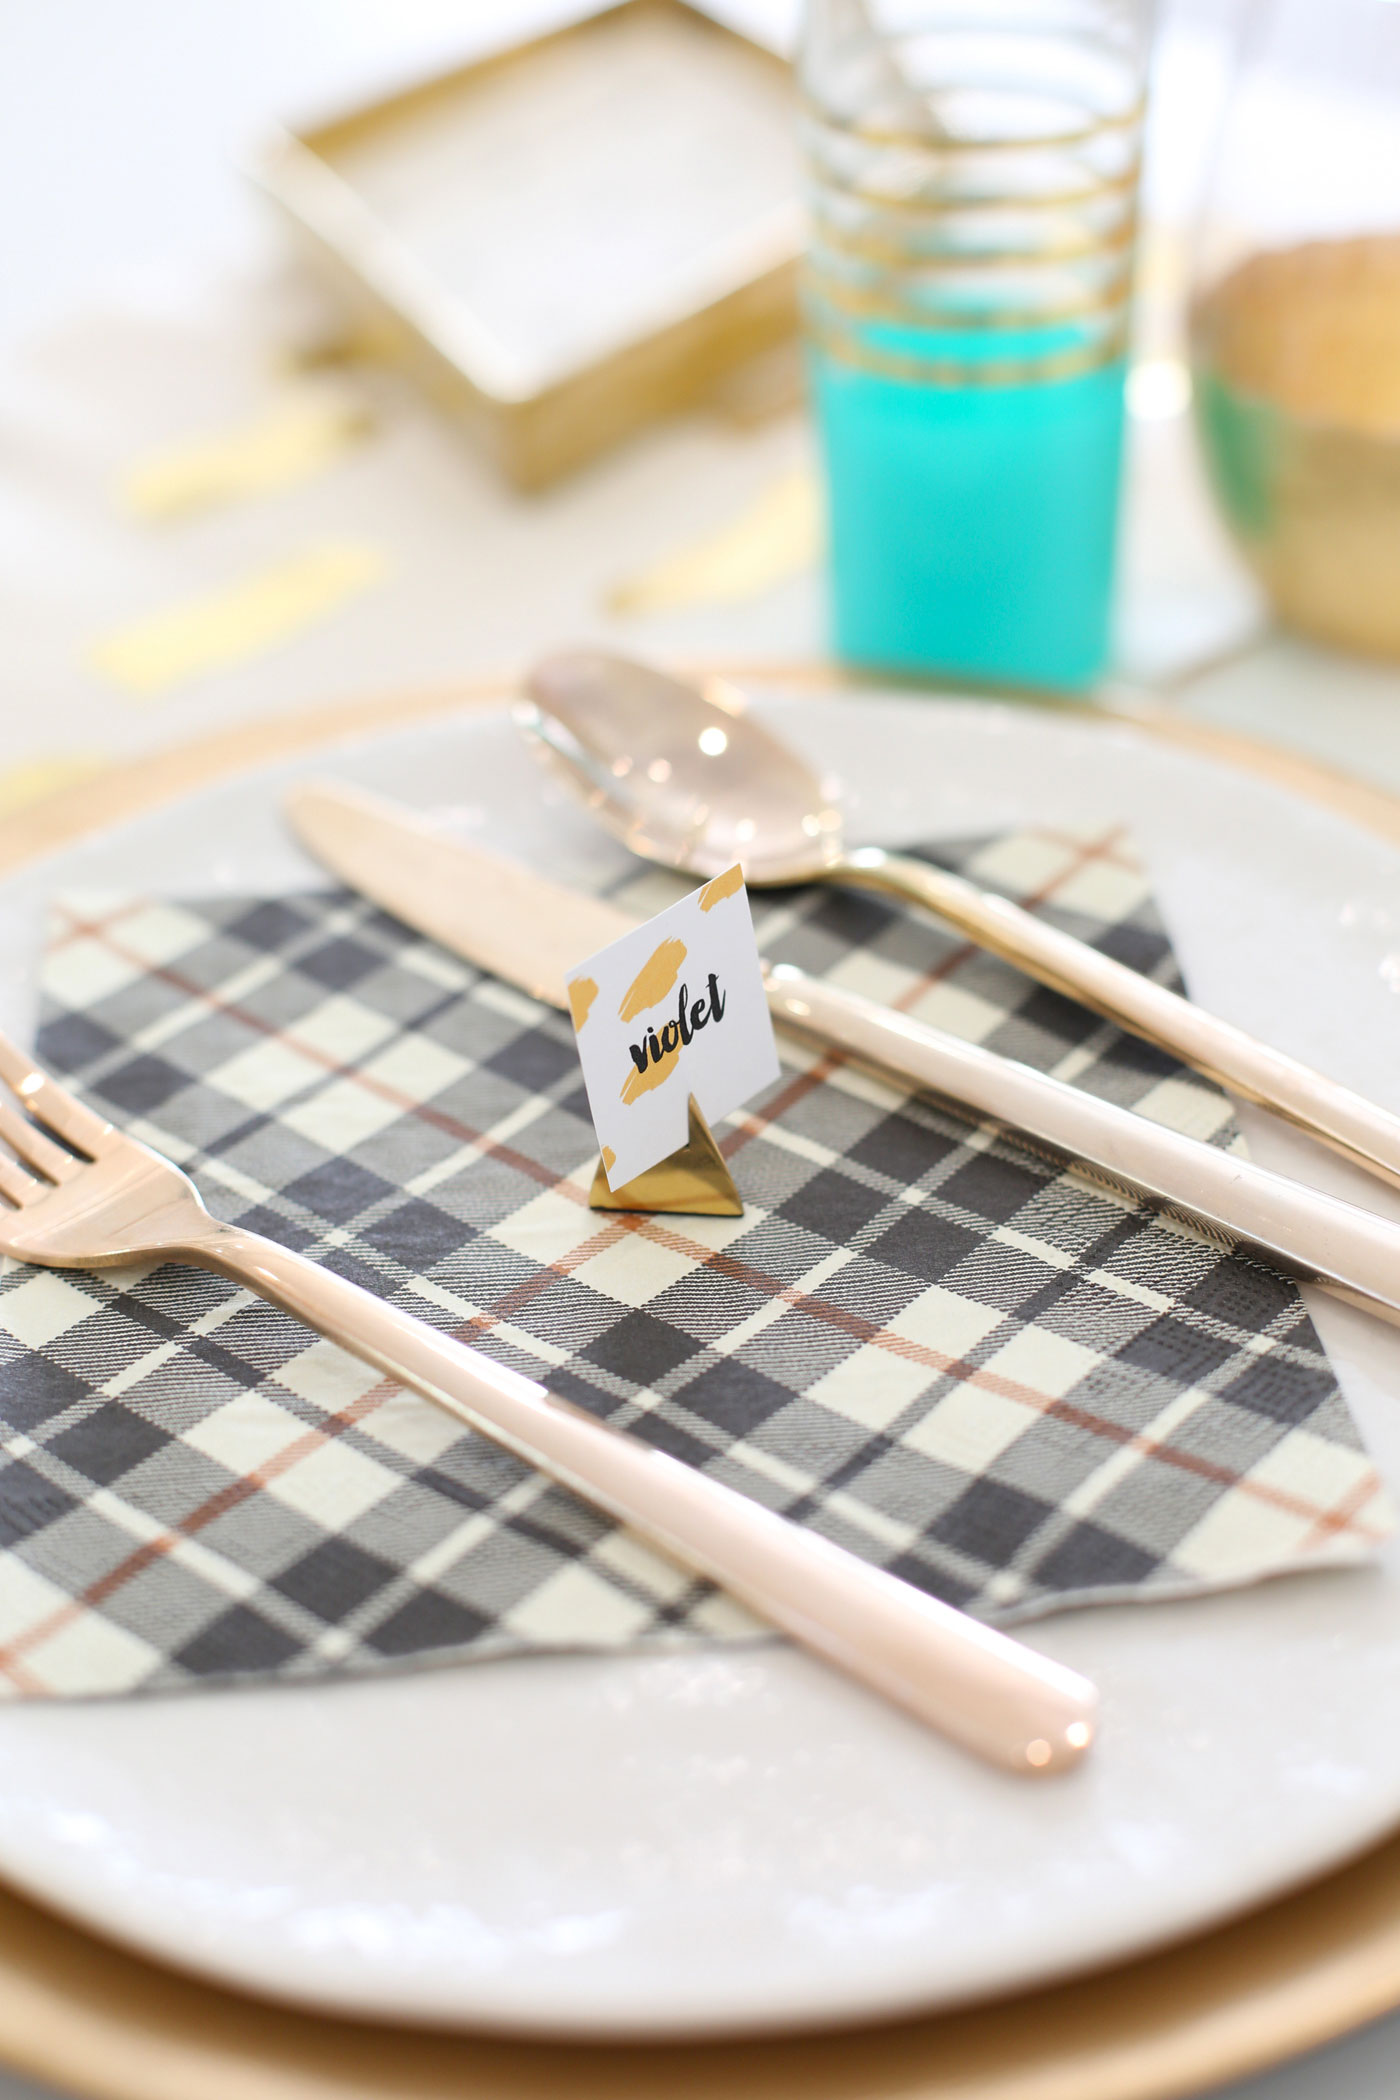 These DIY printable place cards help your guests know who sits where, can make for awesome conversation and help people feel more comfortable.